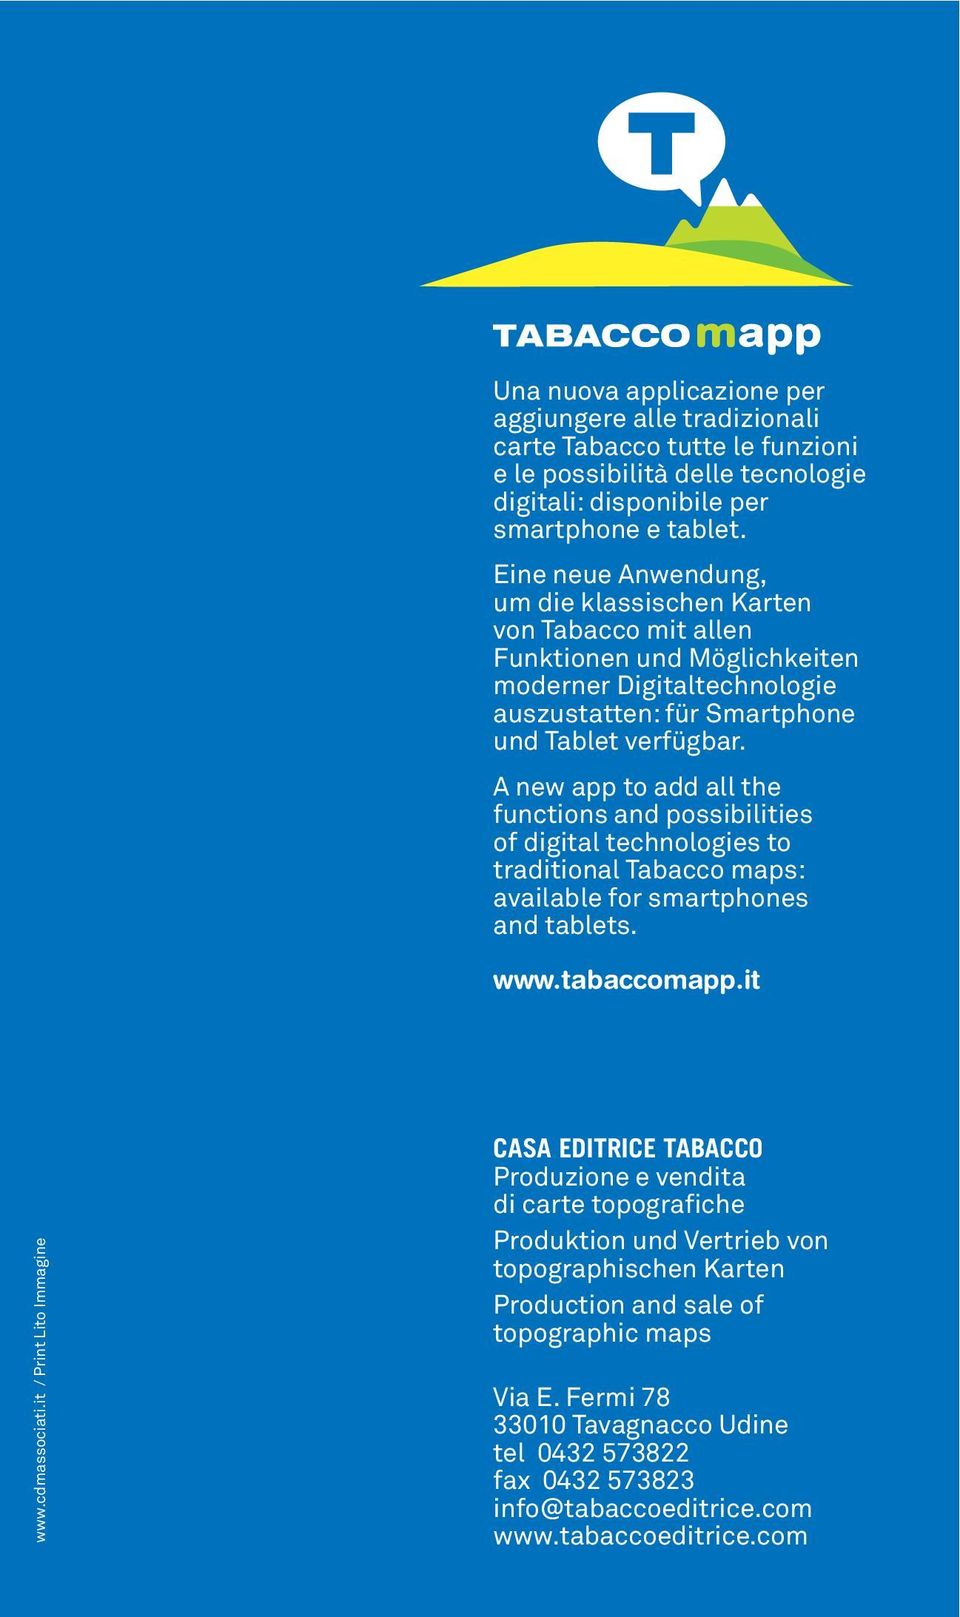 A new app to add all the functions and possibilities of digital technologies to traditional Tabacco maps: available for smartphones and tablets. www.tabaccomapp.it www.cdmassociati.